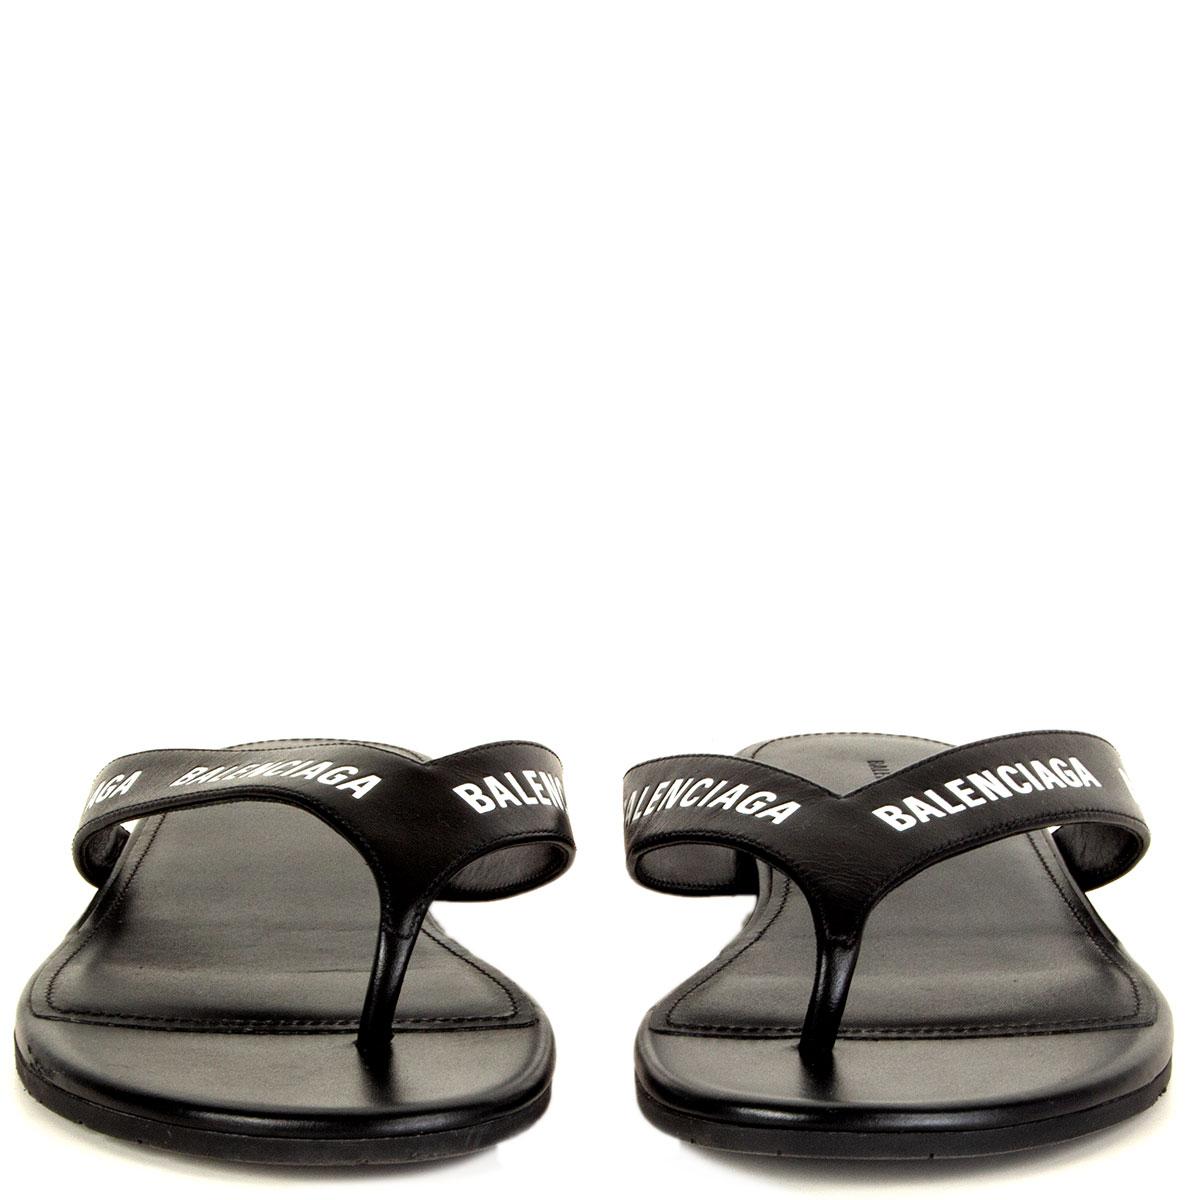 100% authentic Balenciaga allover logo round thong sandals in black and white printed calfskin. They feature a rubber sole. Have been worn and are in excellent condition. 

Measurements
Imprinted Size	37
Shoe Size	37
Inside Sole	24.5cm